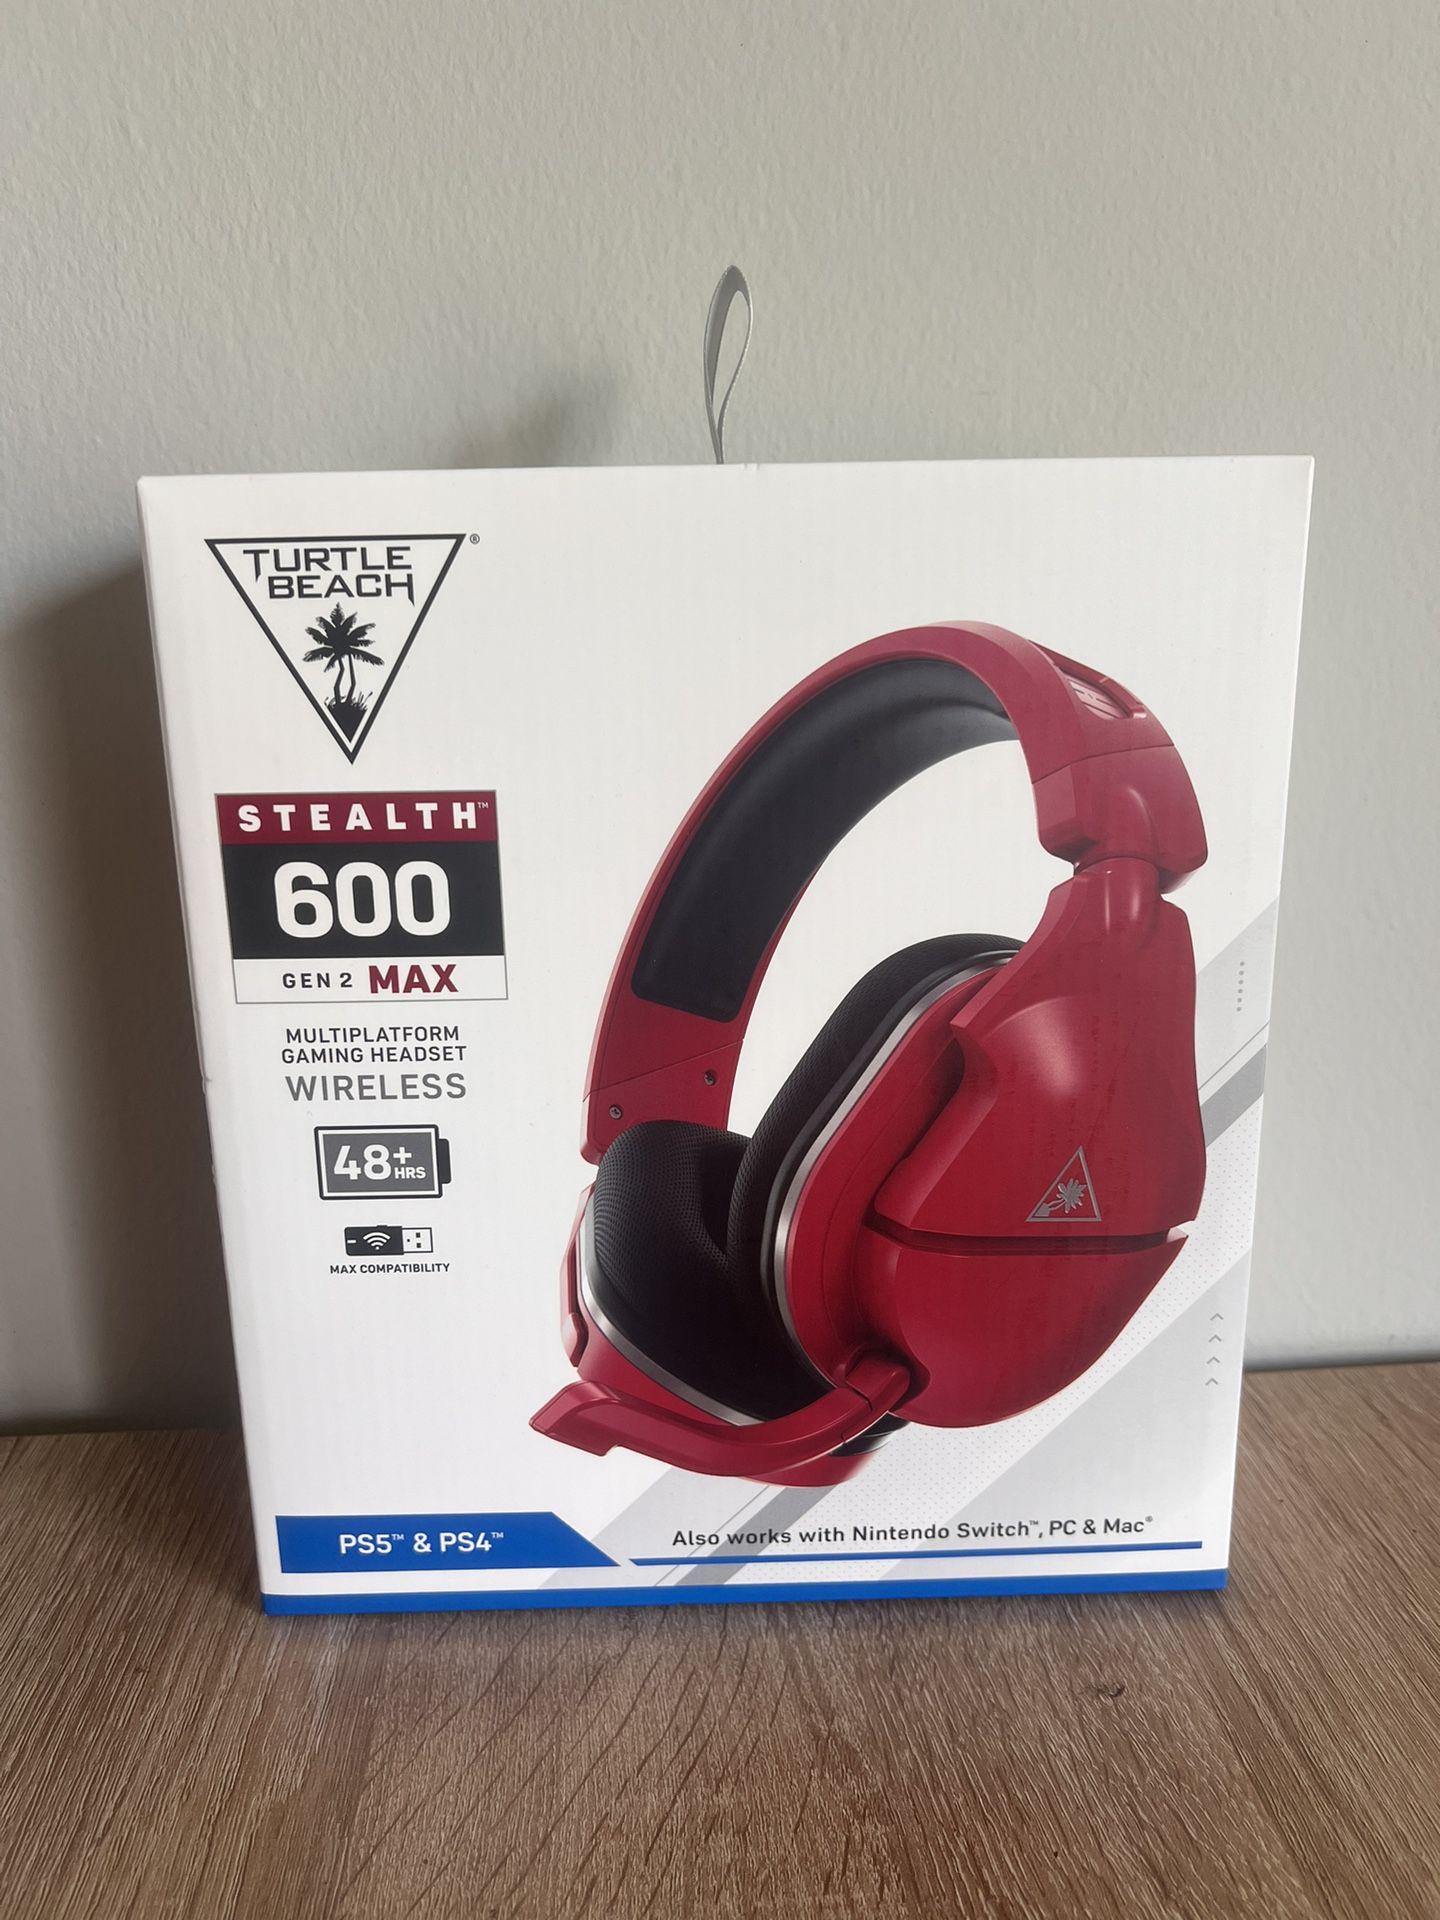 Turtle Beach Stealth 600 Gen 2 MAX Wireless Headset PS4/PS5/PC/Switch - Red - Brand New